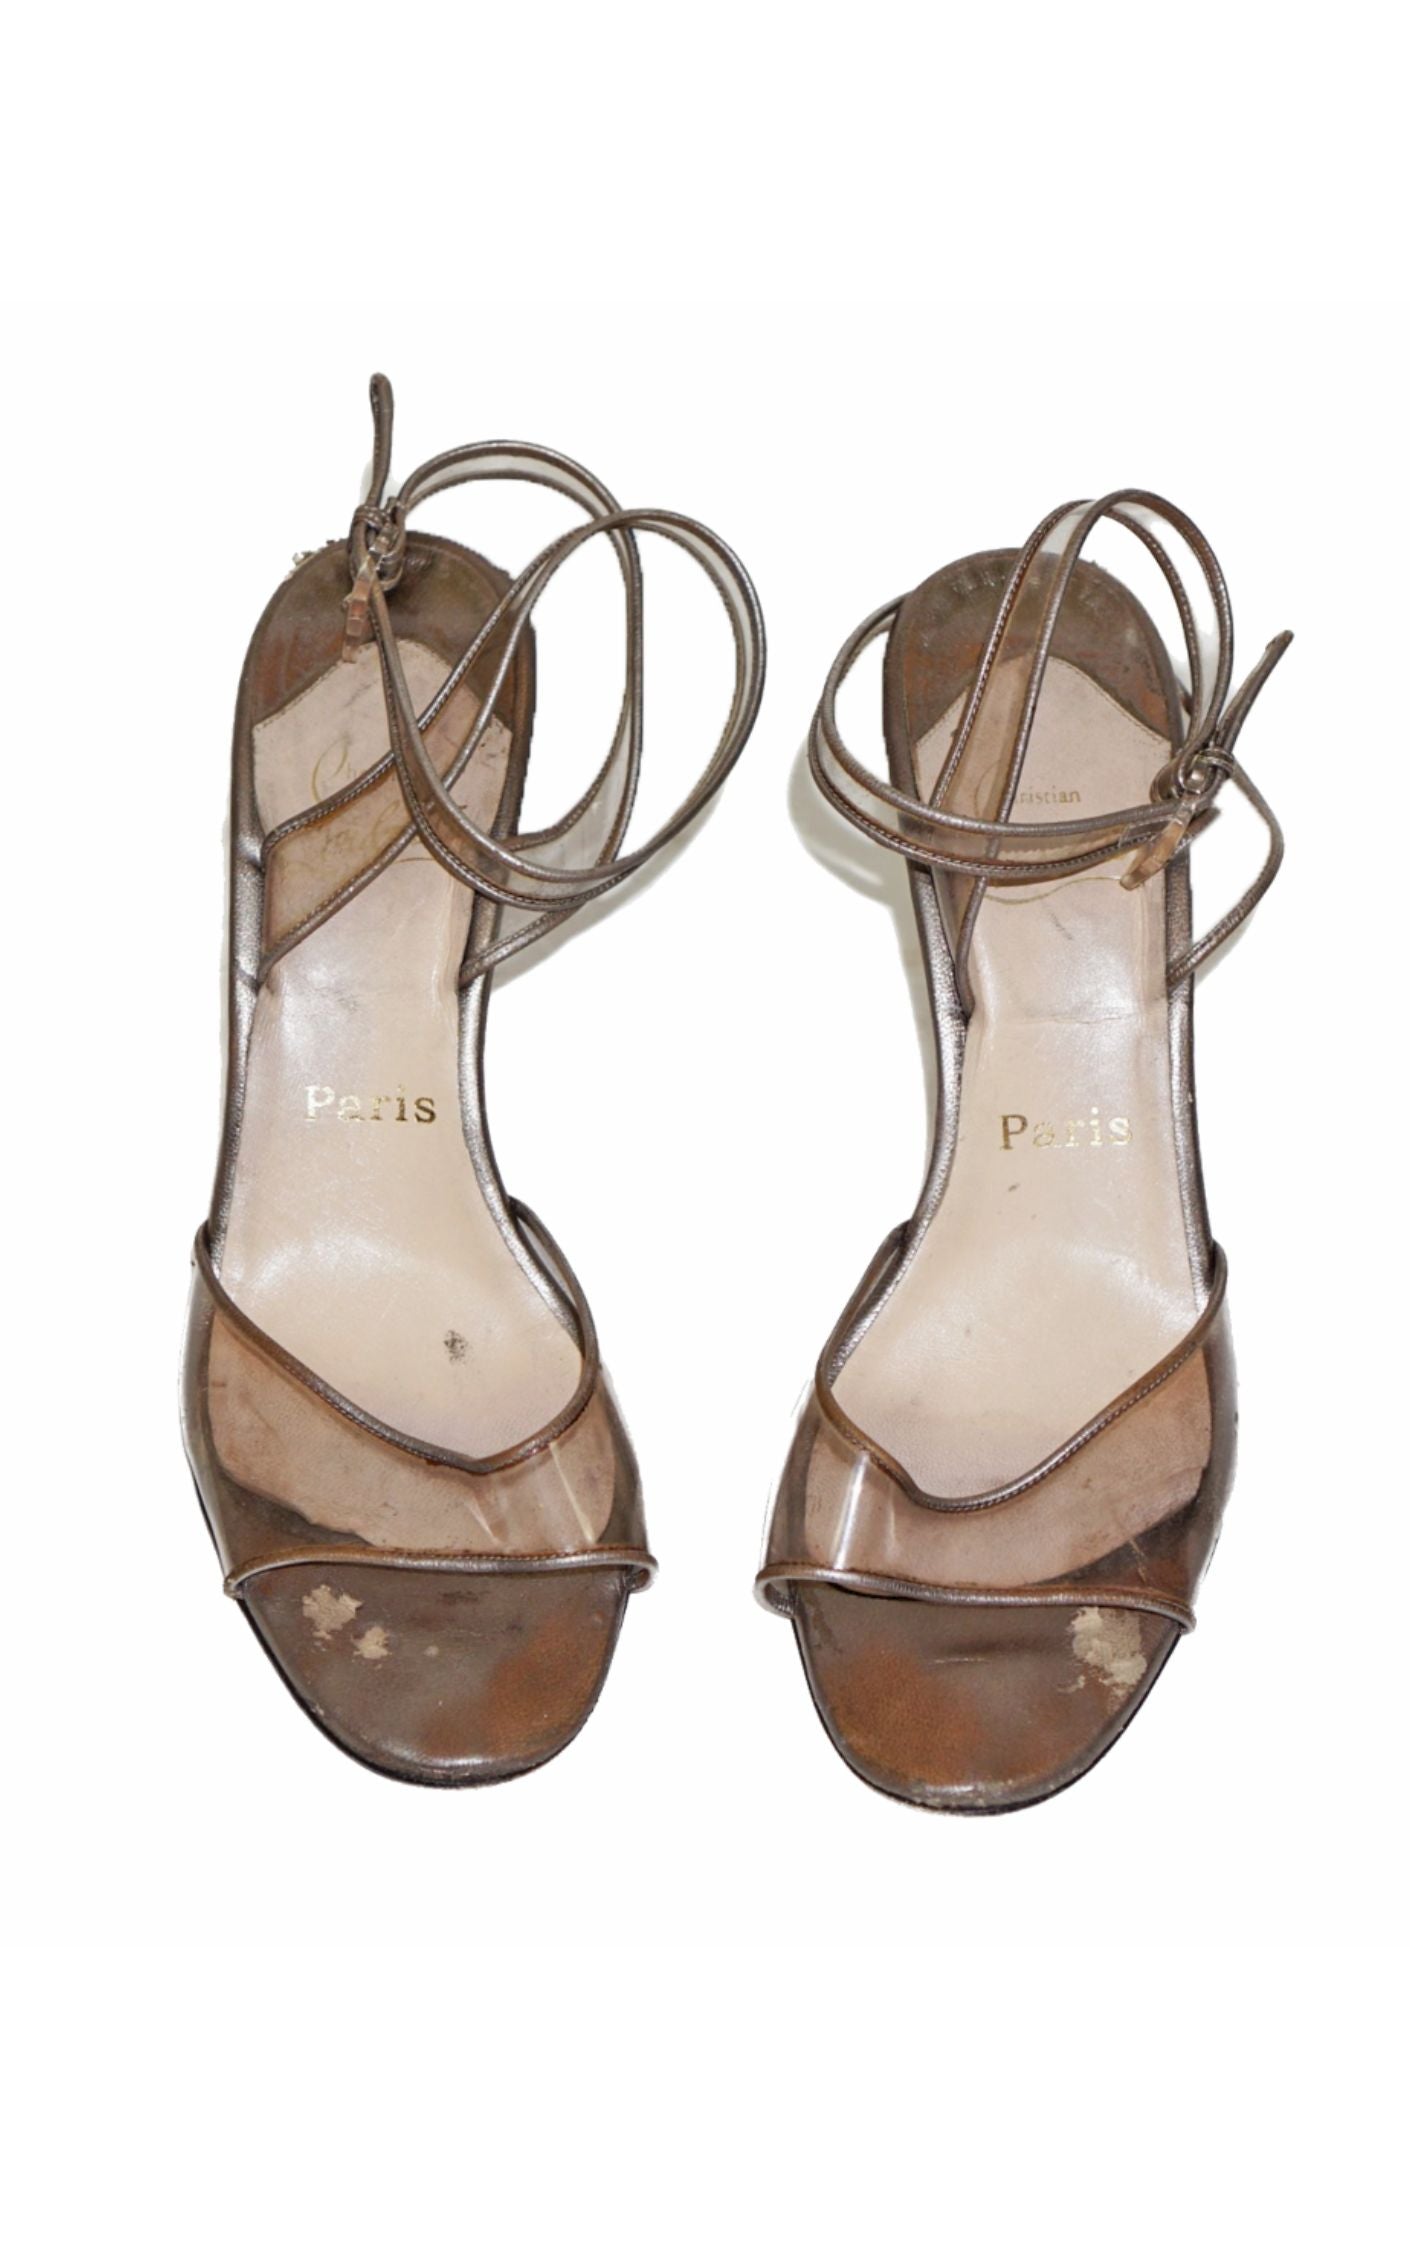 CHRISTIAN LOUBOUTIN Clear Strap Heels Sandals resellum